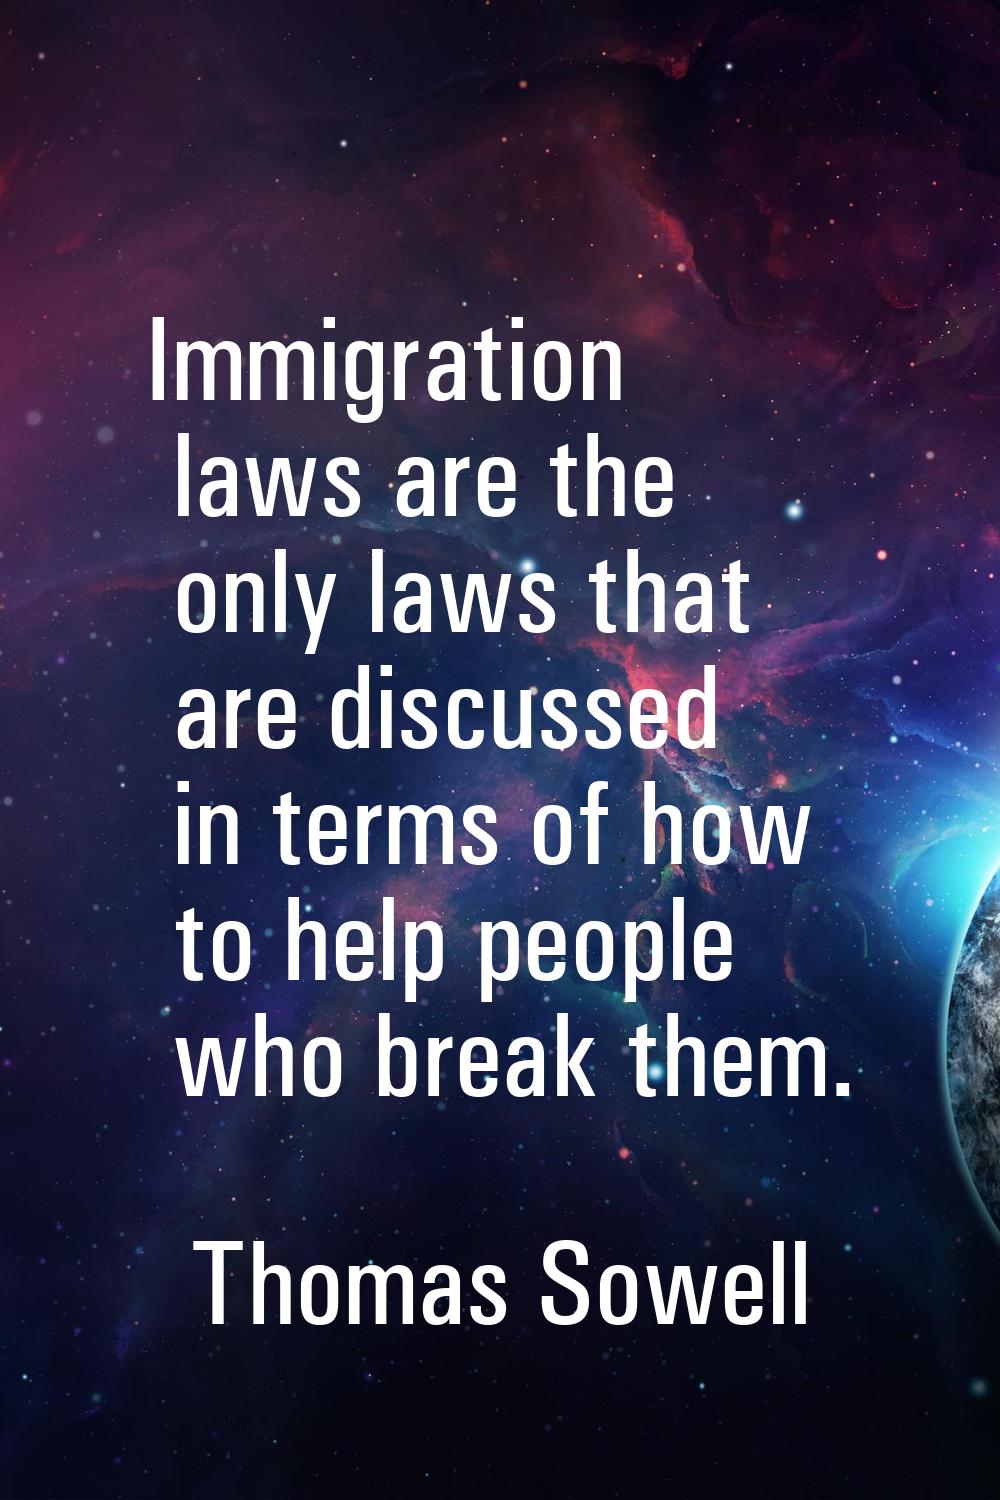 Immigration laws are the only laws that are discussed in terms of how to help people who break them